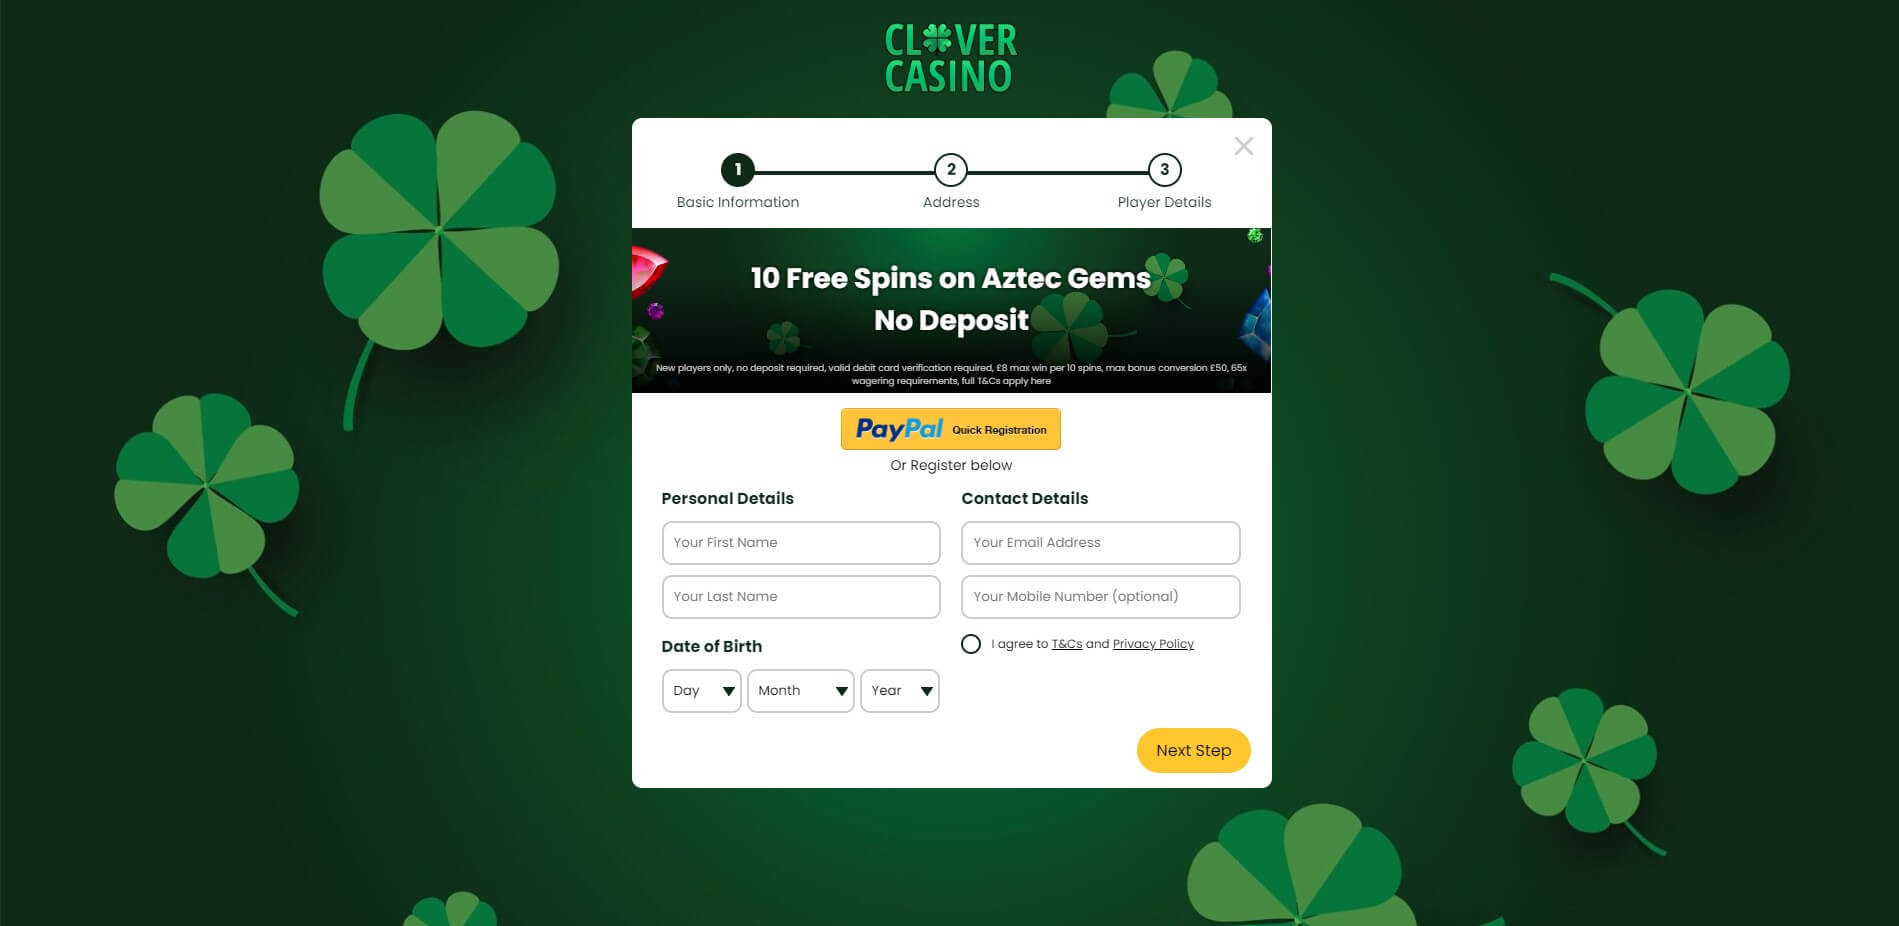 Sign Up at Clover Casino